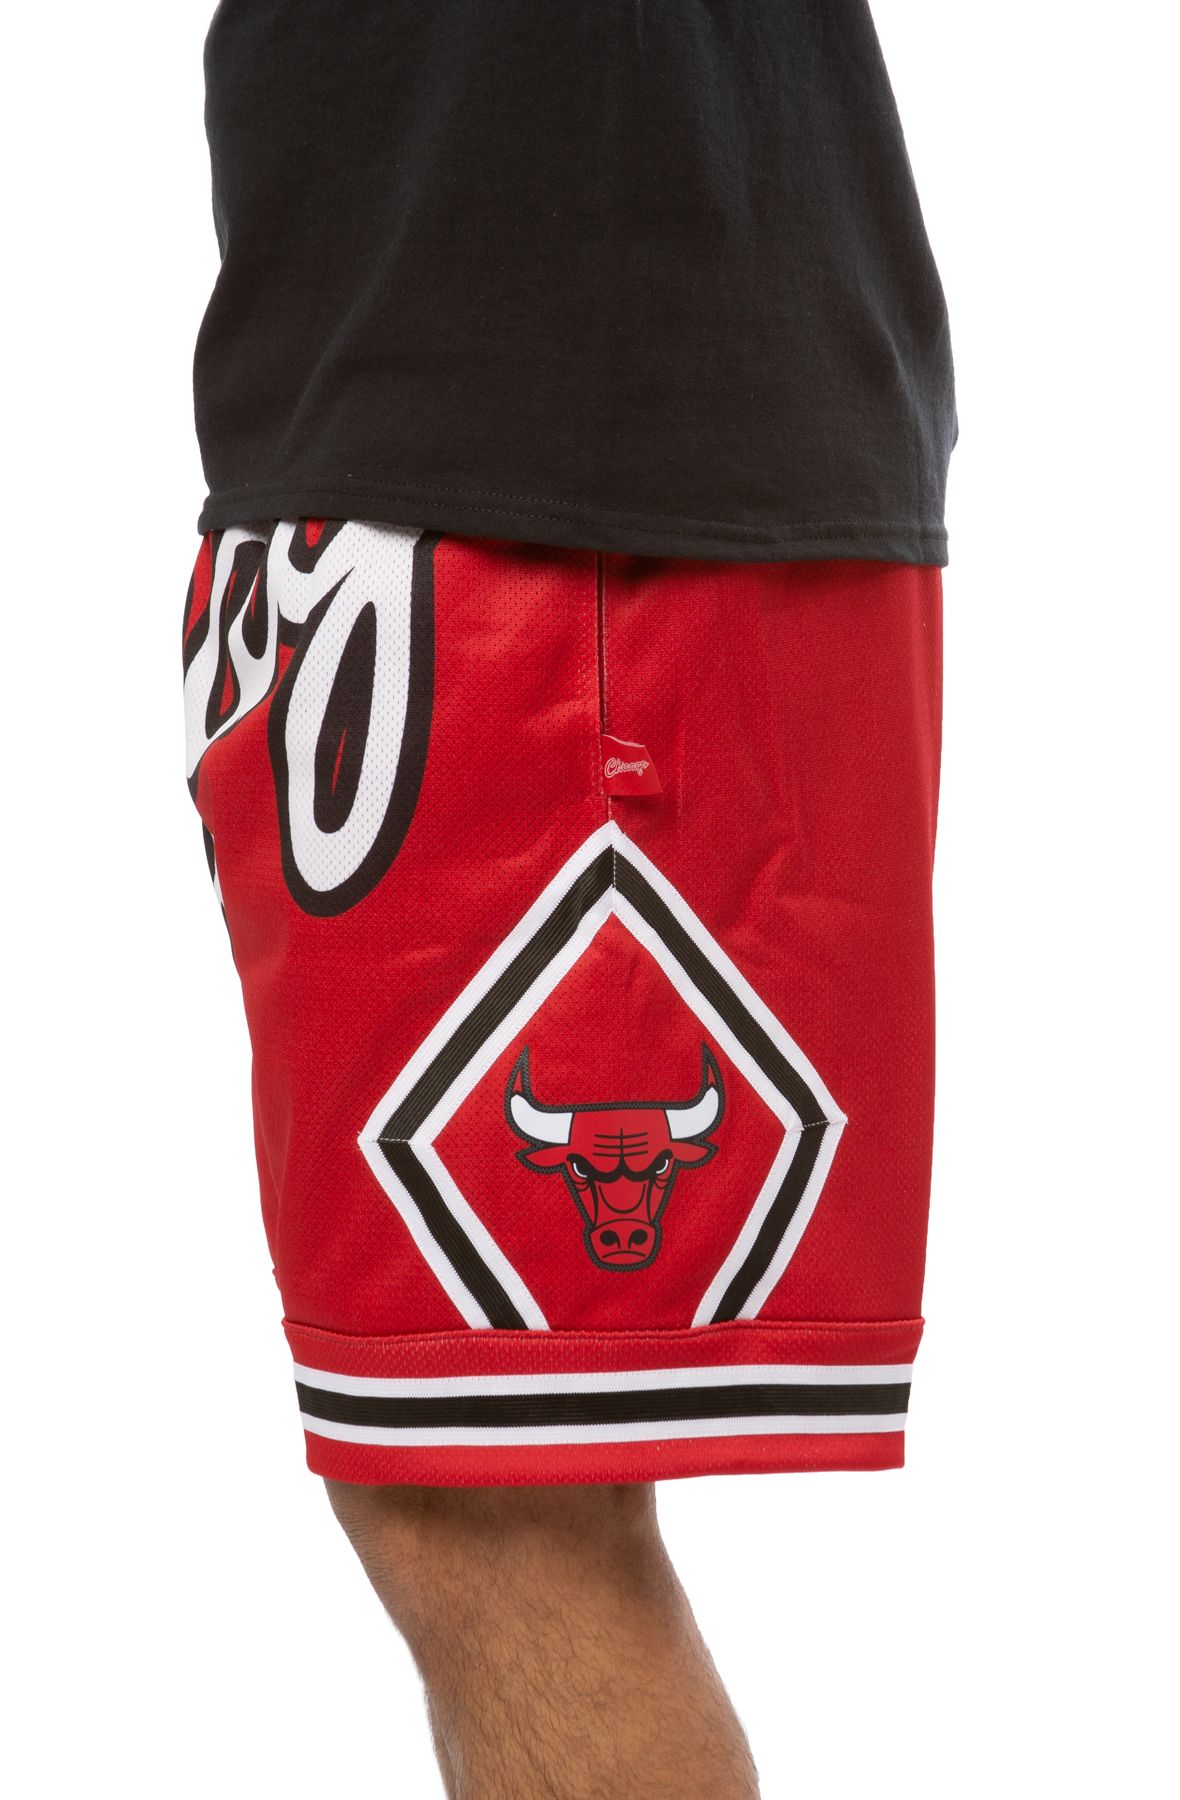 Mitchell & Ness RED Big Face Chicago Bulls India